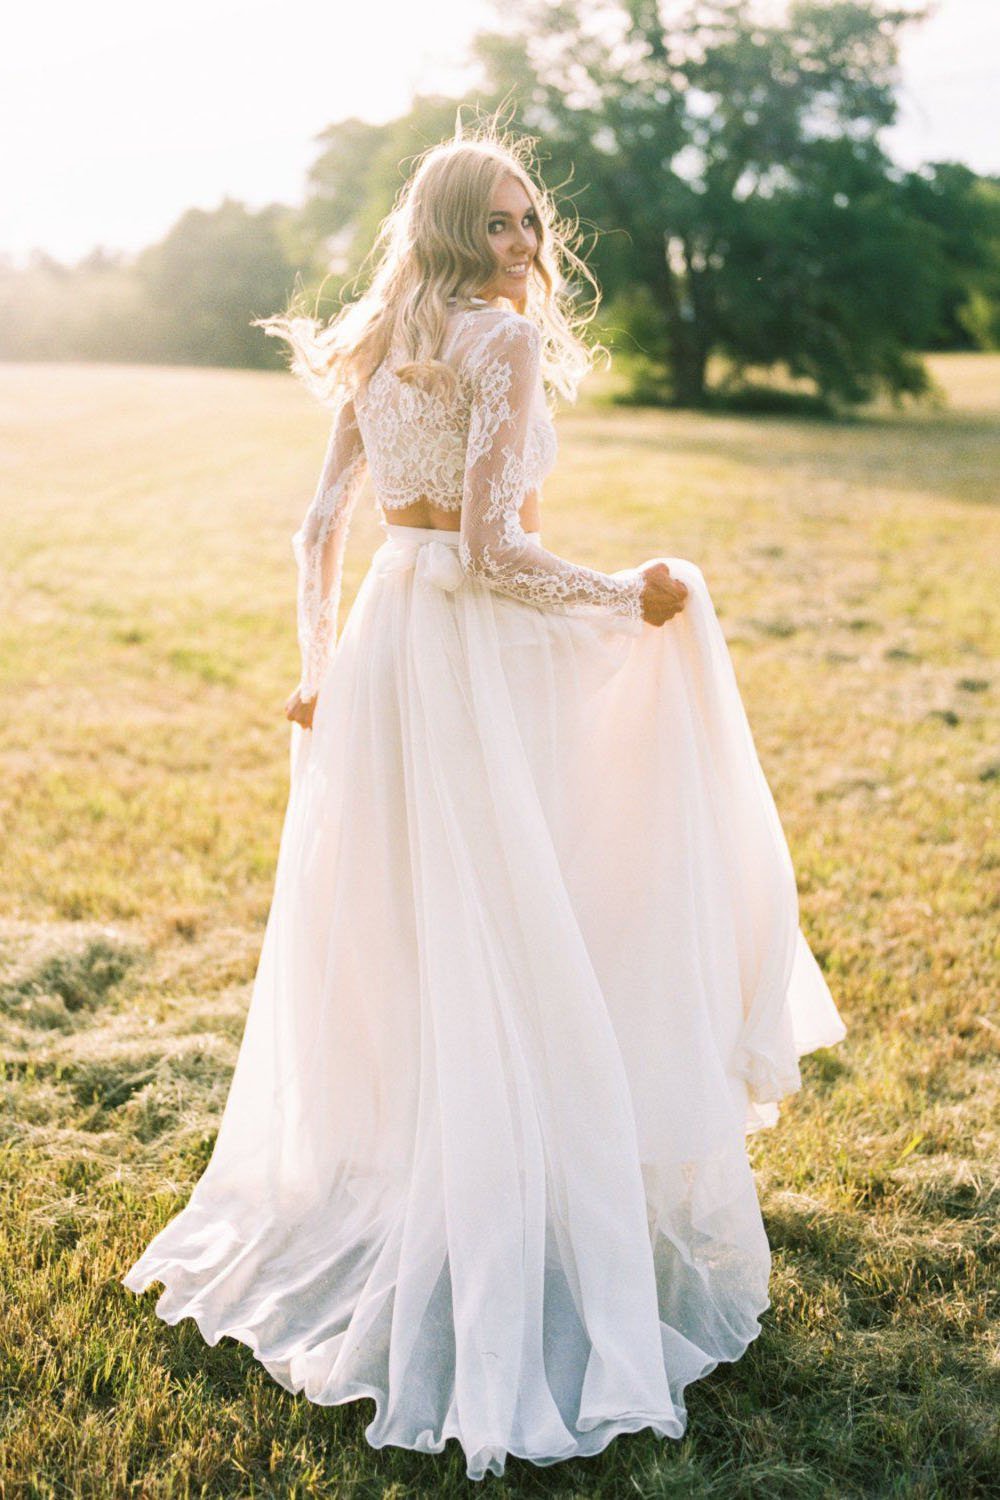 Romantic Two Piece Long Sleeves Wedding Dress with Lace, A Line Ivory Chiffon Bridal Dress N2398